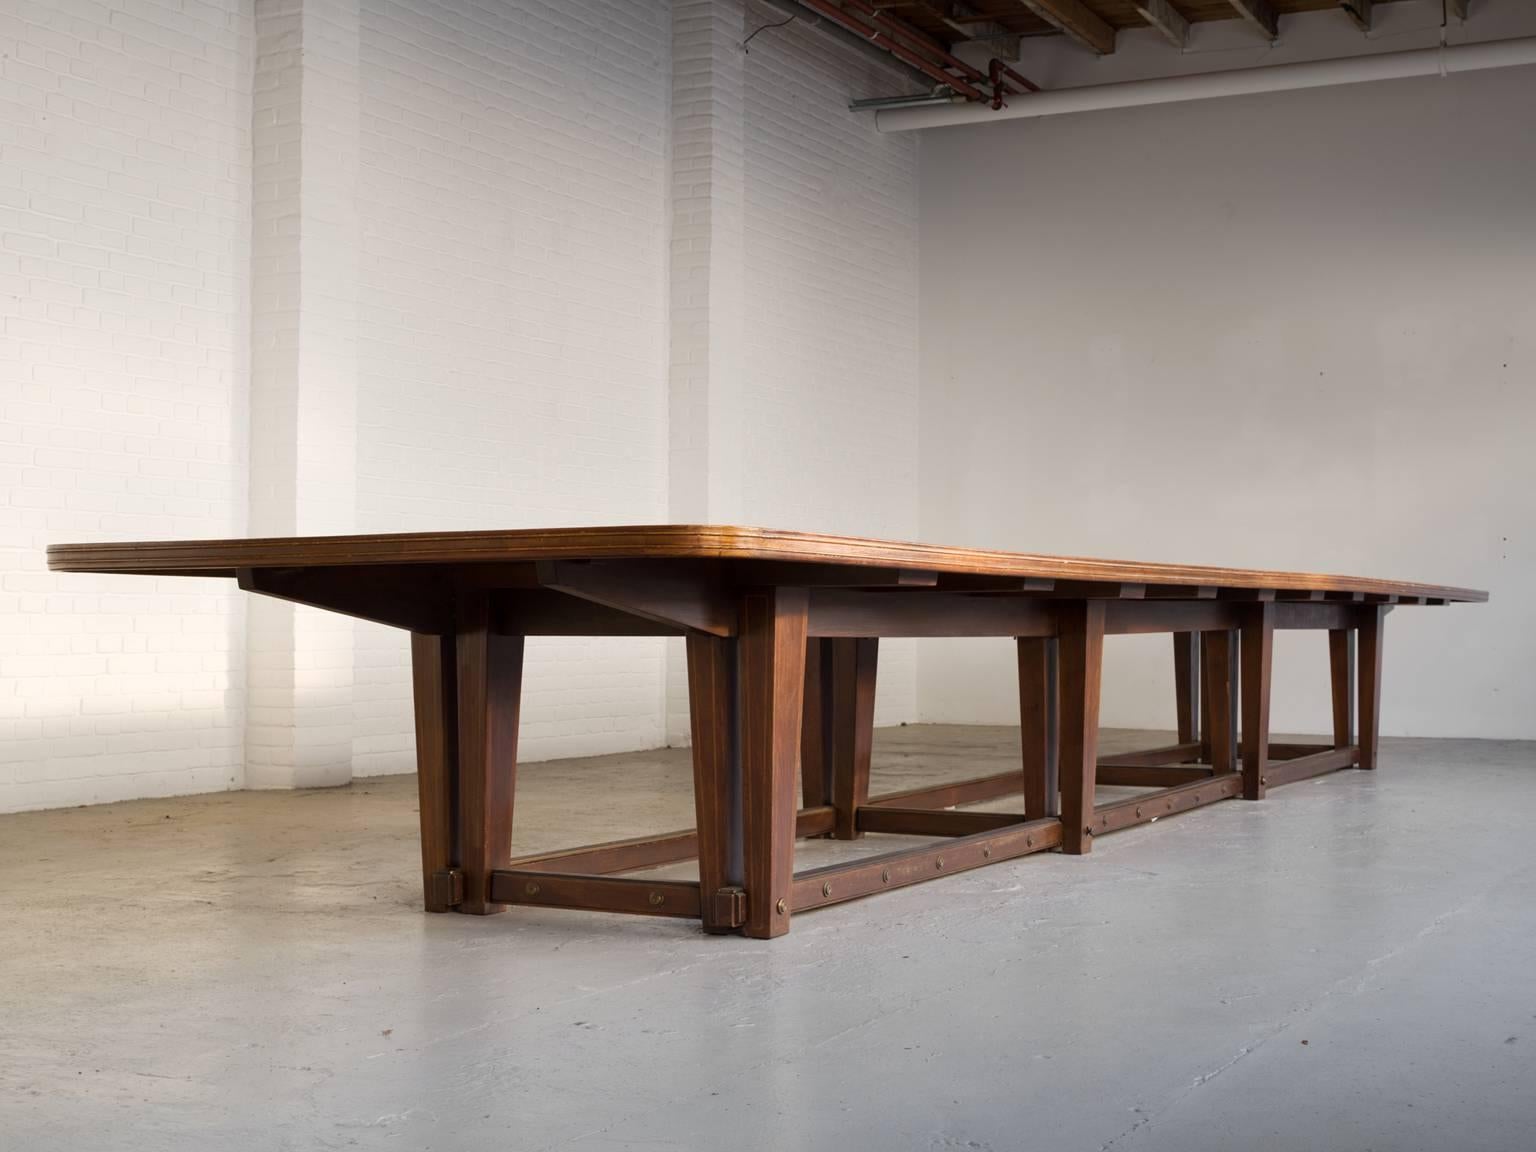 European 23ft / 720cm Extreme Large Conference Table in Walnut with Inlayed Top